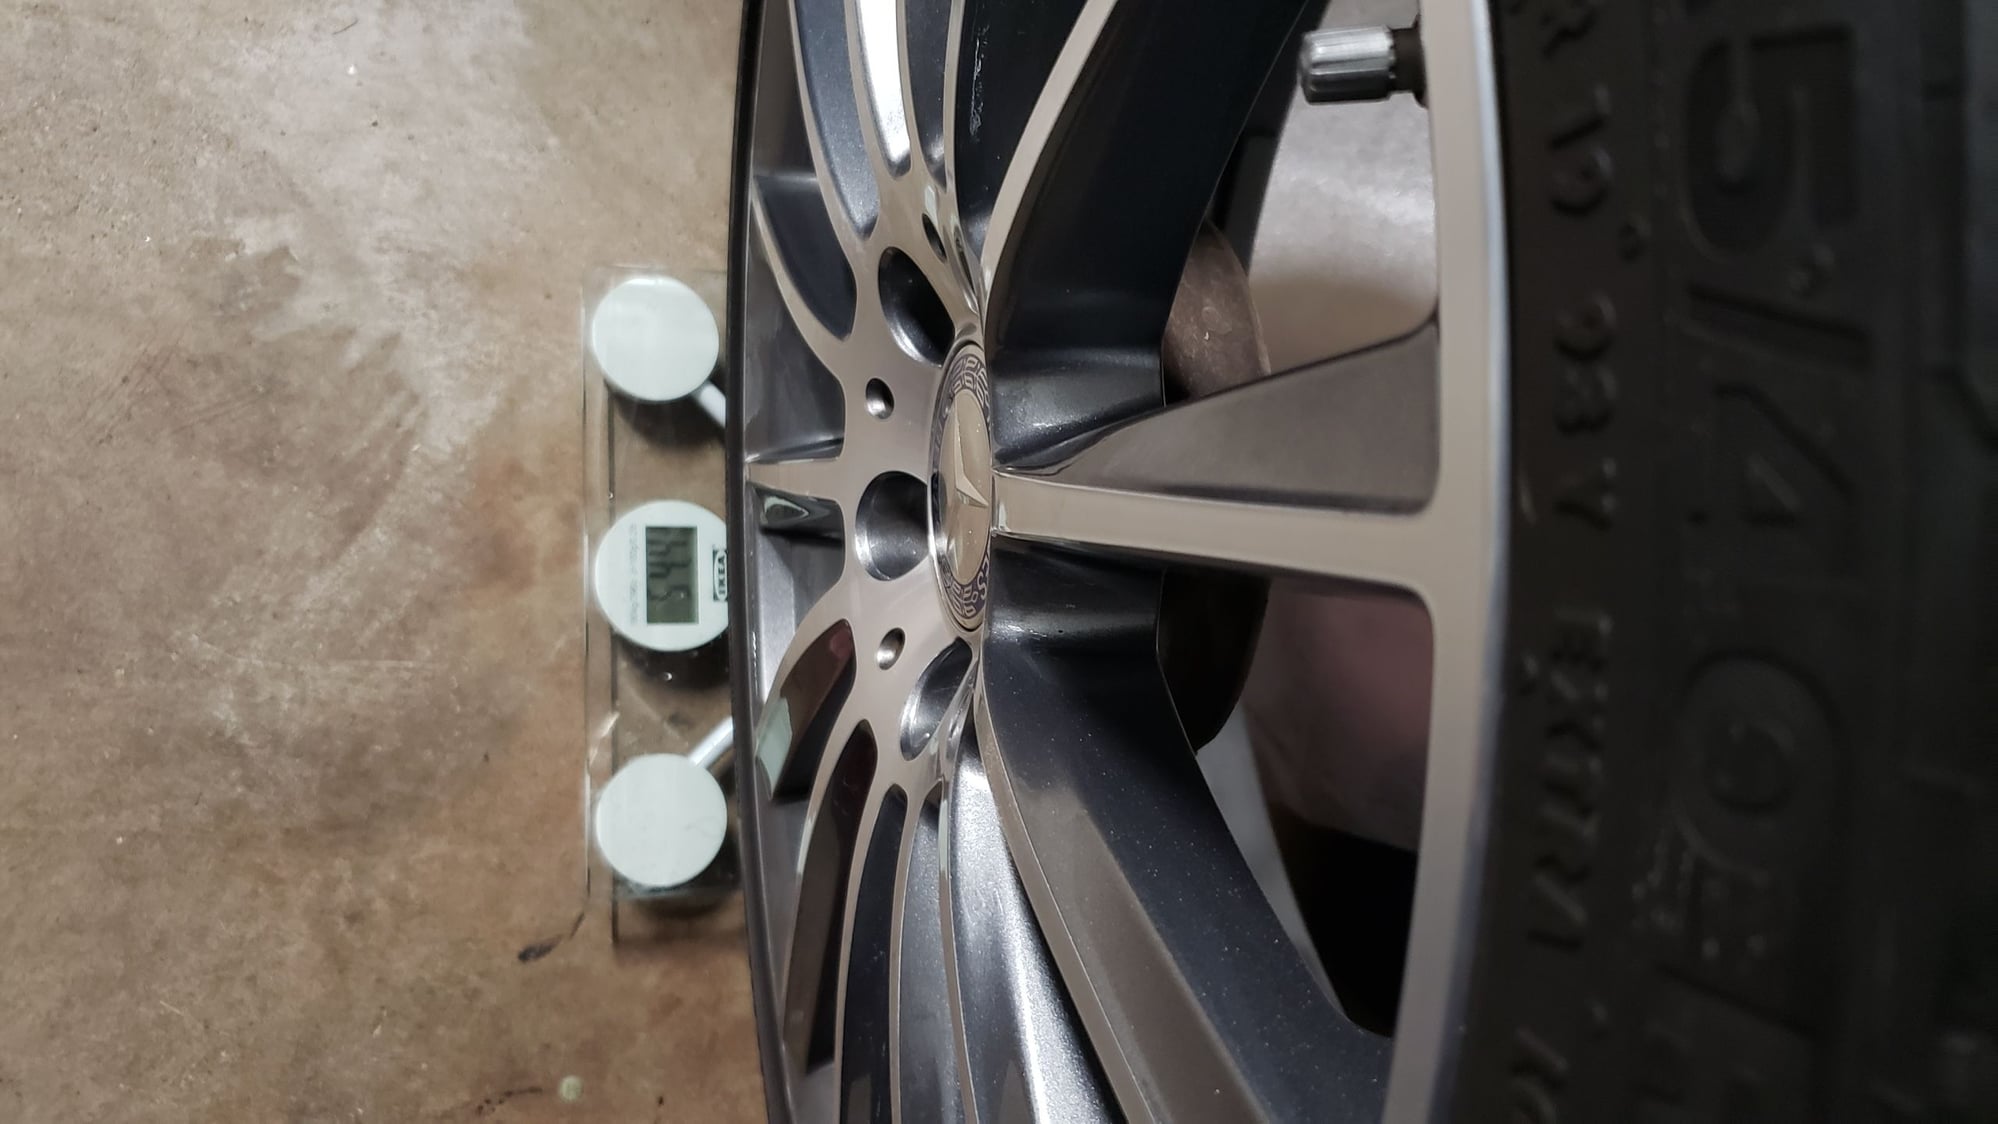 Wheels and Tires/Axles - C450 20 spoke amg wheels and sensor <16miles for sale Austin TX - Used - 2016 Mercedes-Benz C450 AMG - Austin, TX 78739, United States